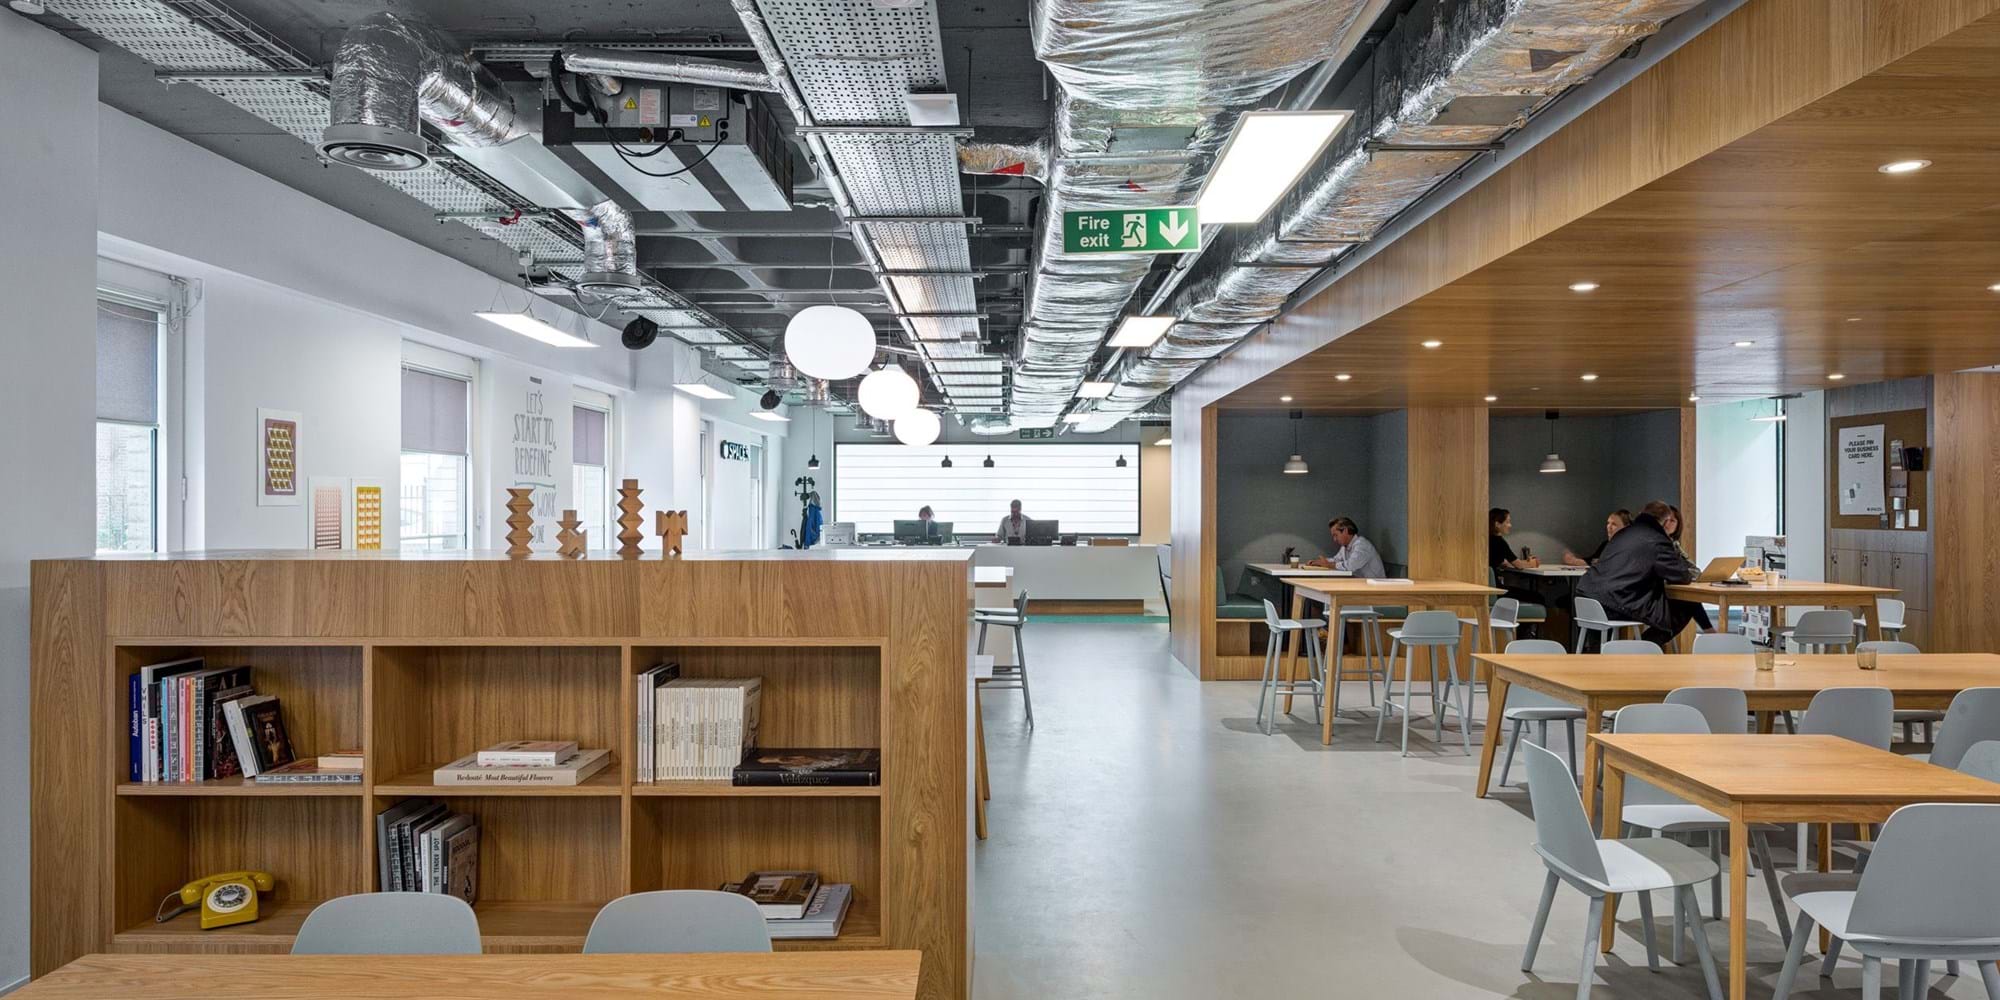 Modus Workspace office design, fit out and refurbishment - Spaces - Brighton - Spaces Brighton 15 highres sRGB.jpg